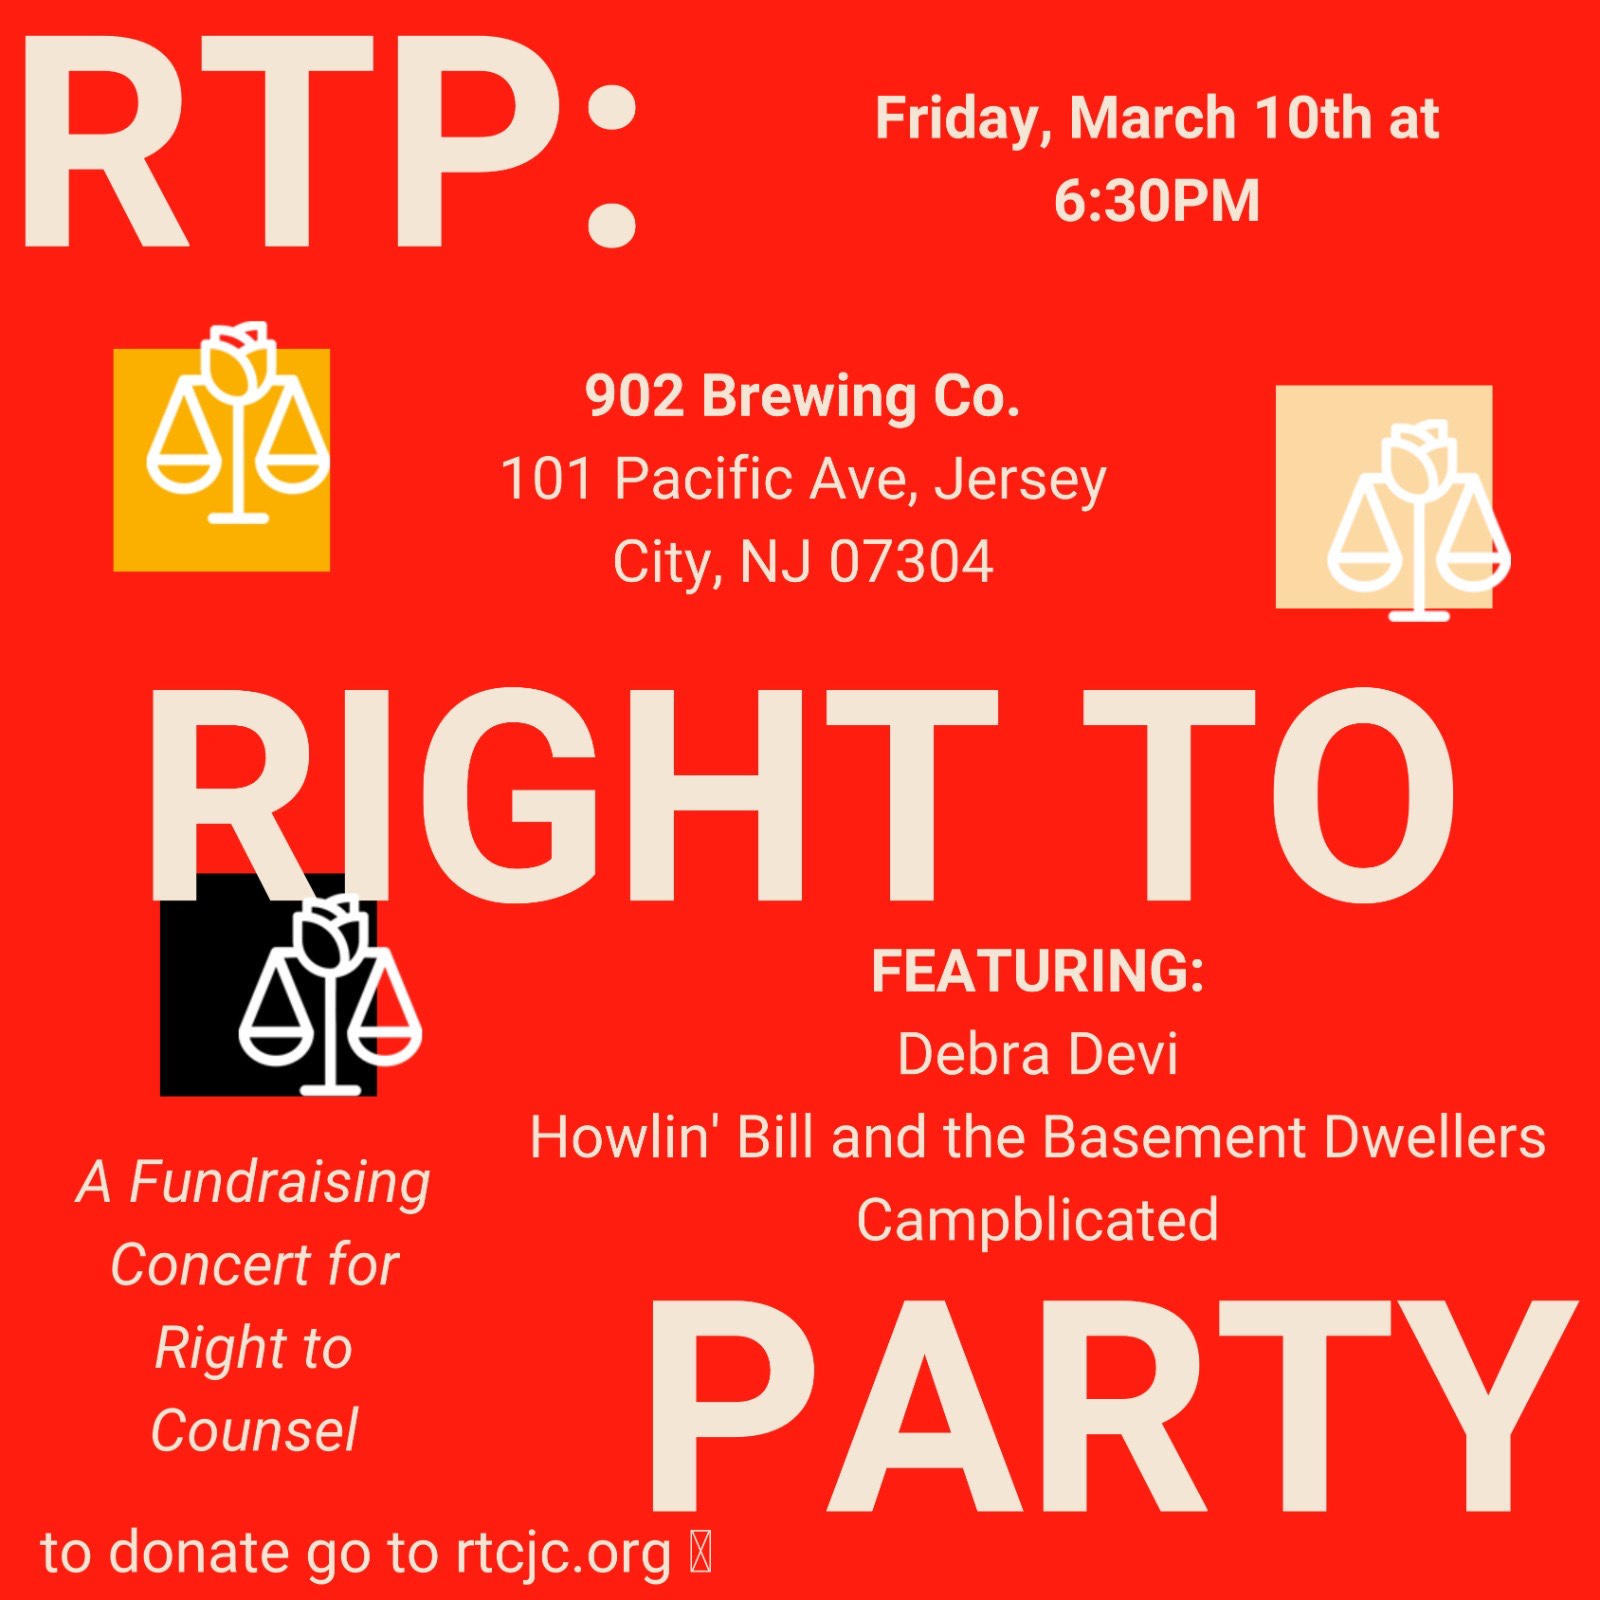 RTP: Right To Party, 902 Brewing Co, 101 Pacific Ave Jersey city 07304, Friday, March 10th at 6:30pm